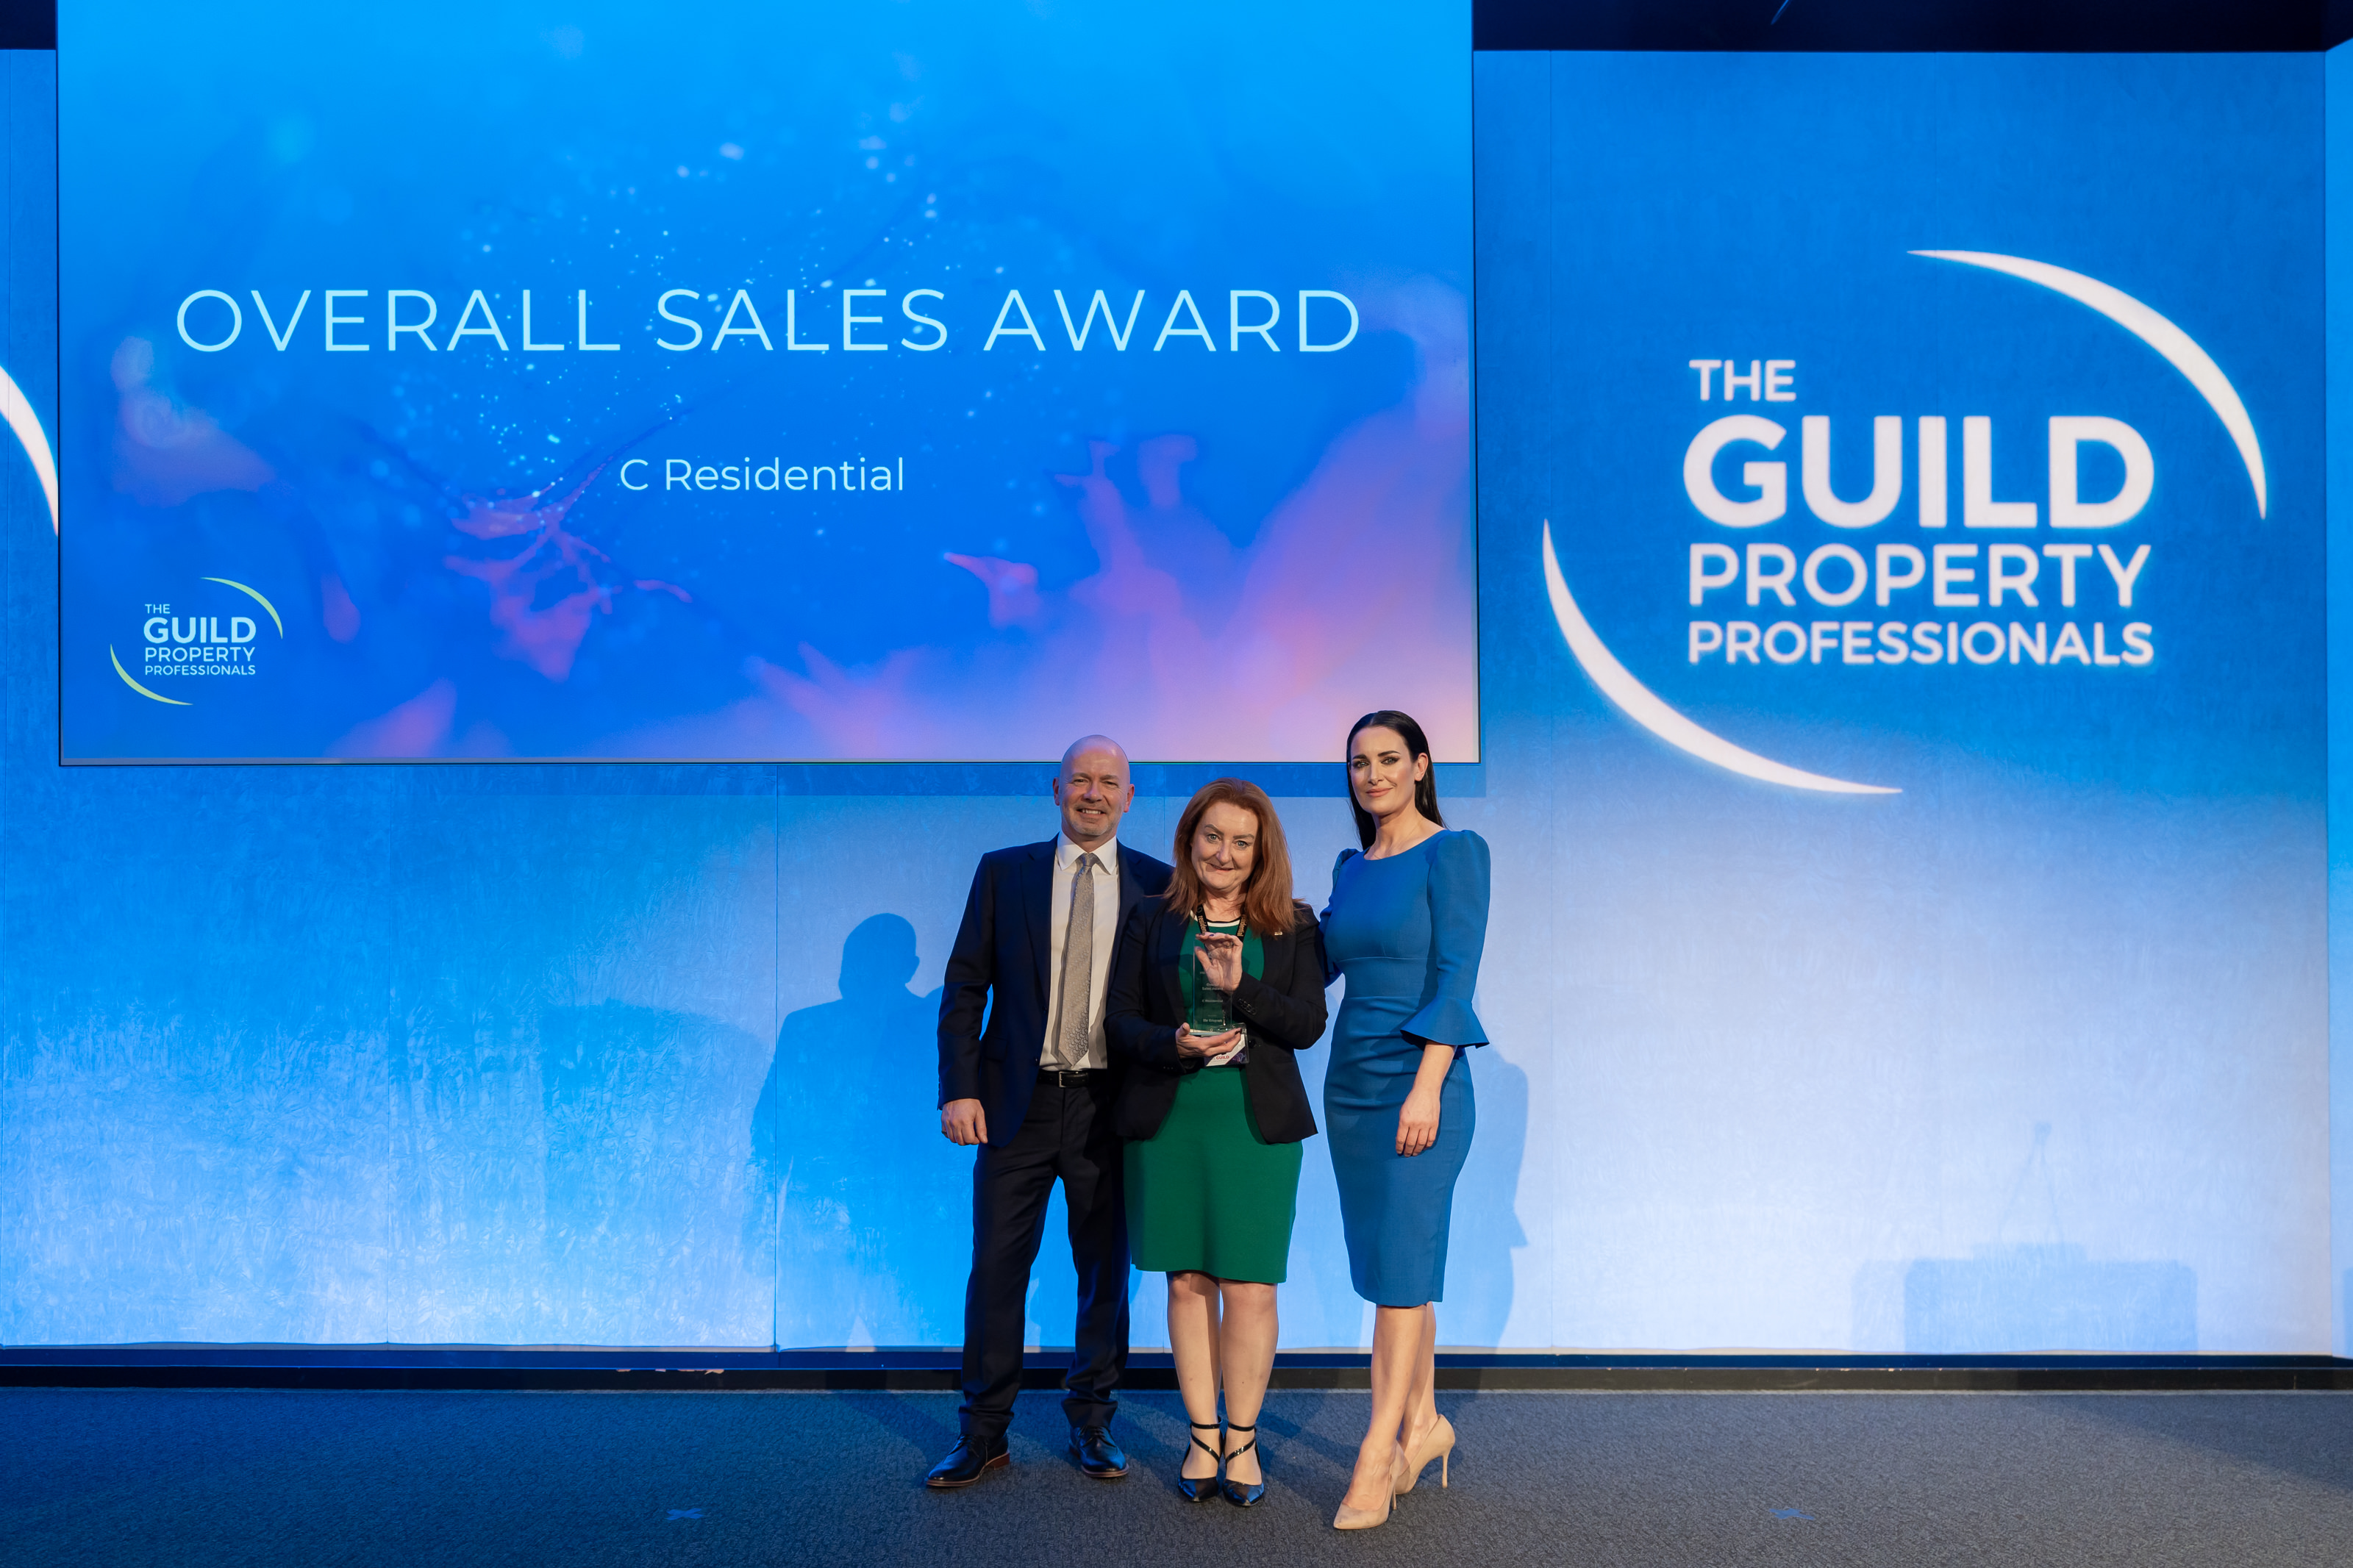 C residential took our overall sales award